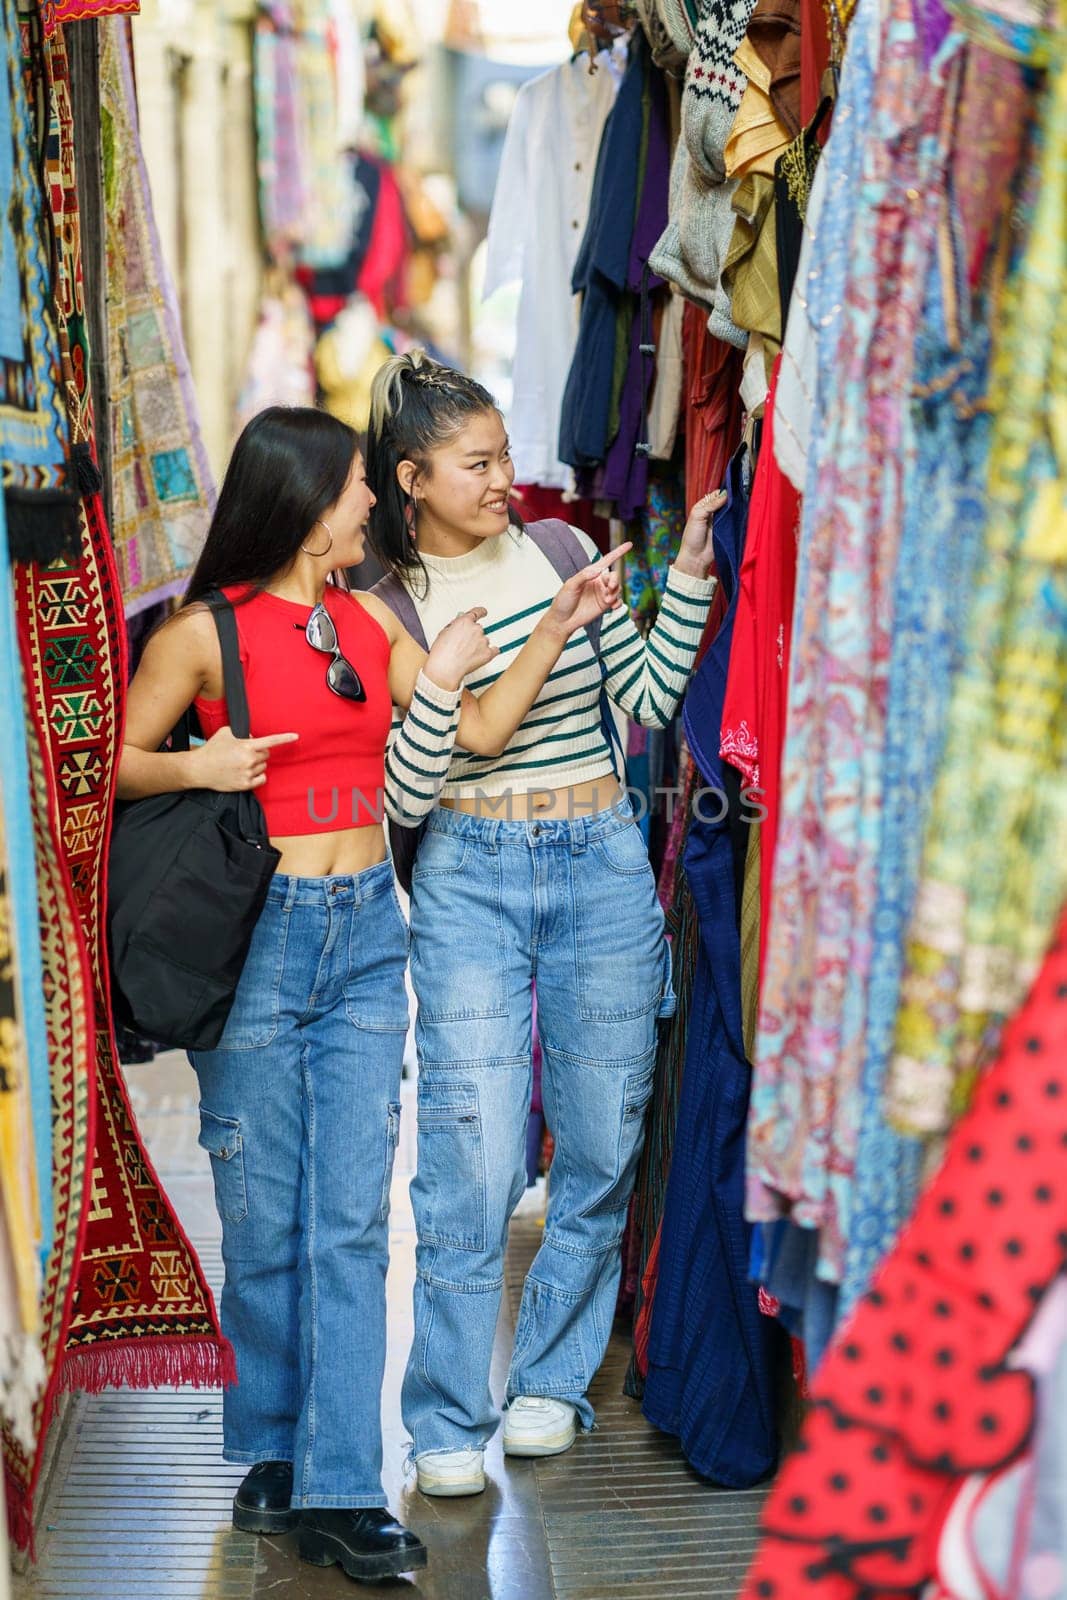 Smiling girls friends in casual clothes walking along colorful clothing store on street market in city during summer vacation